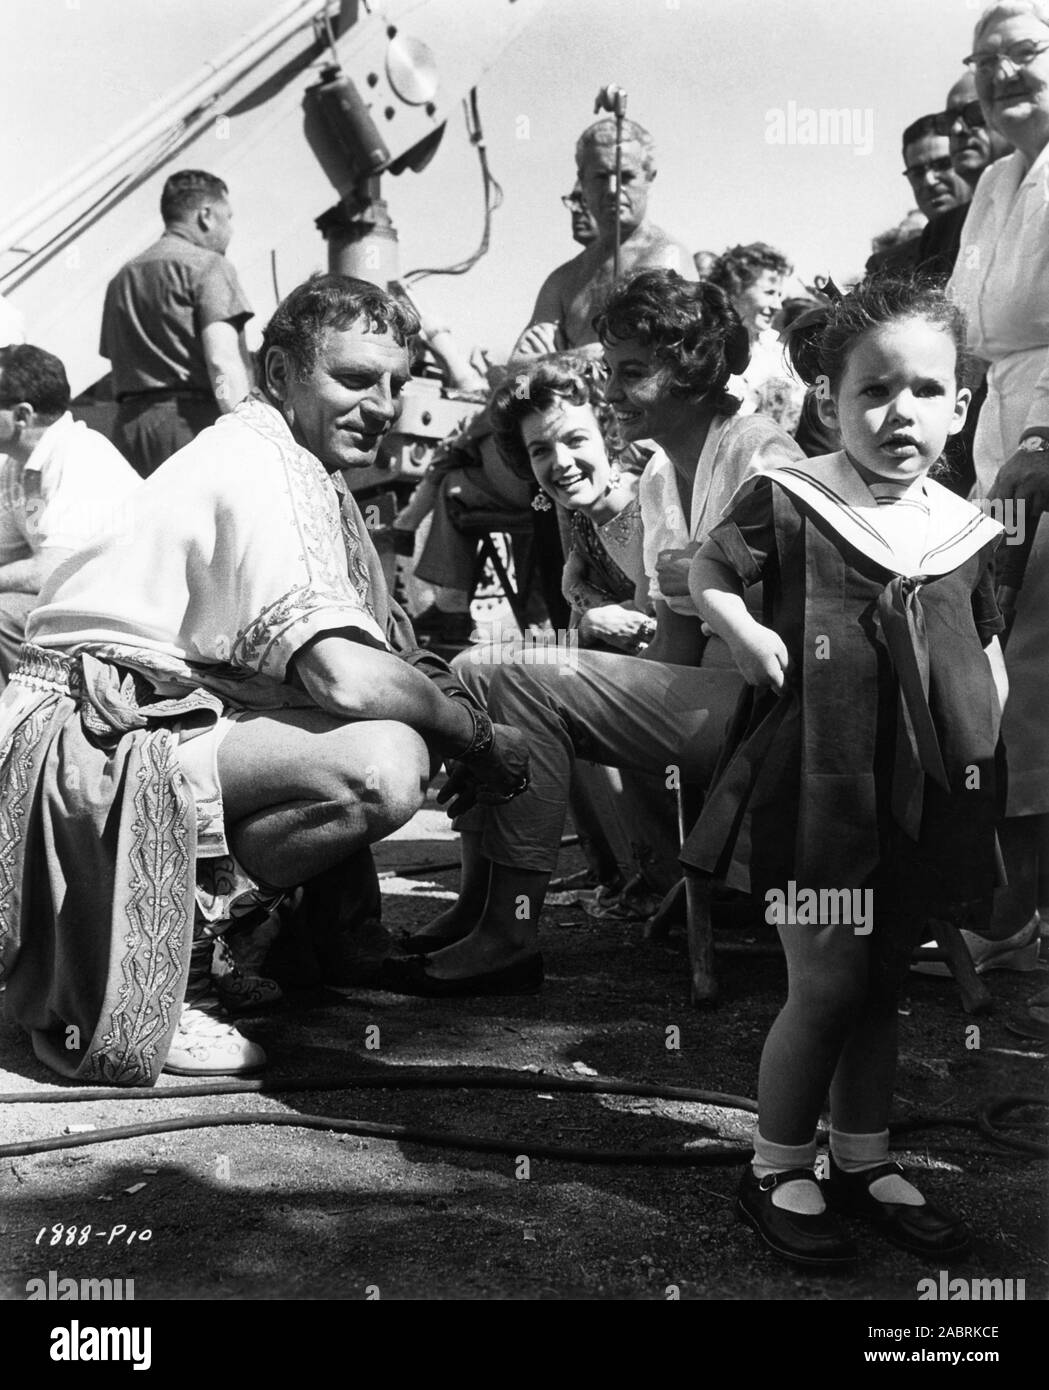 LAURENCE OLIVIER JOANNA BARNES JEAN SIMMONS and her three year old daughter TRACY GRANGER on set candid during filming of SPARTACUS 1960 director STANLEY KUBRICK novel Howard Fast screenplay Dalton Trumbo executive producer Kirk Douglas Bryna Productions / Universal Pictures Stock Photo